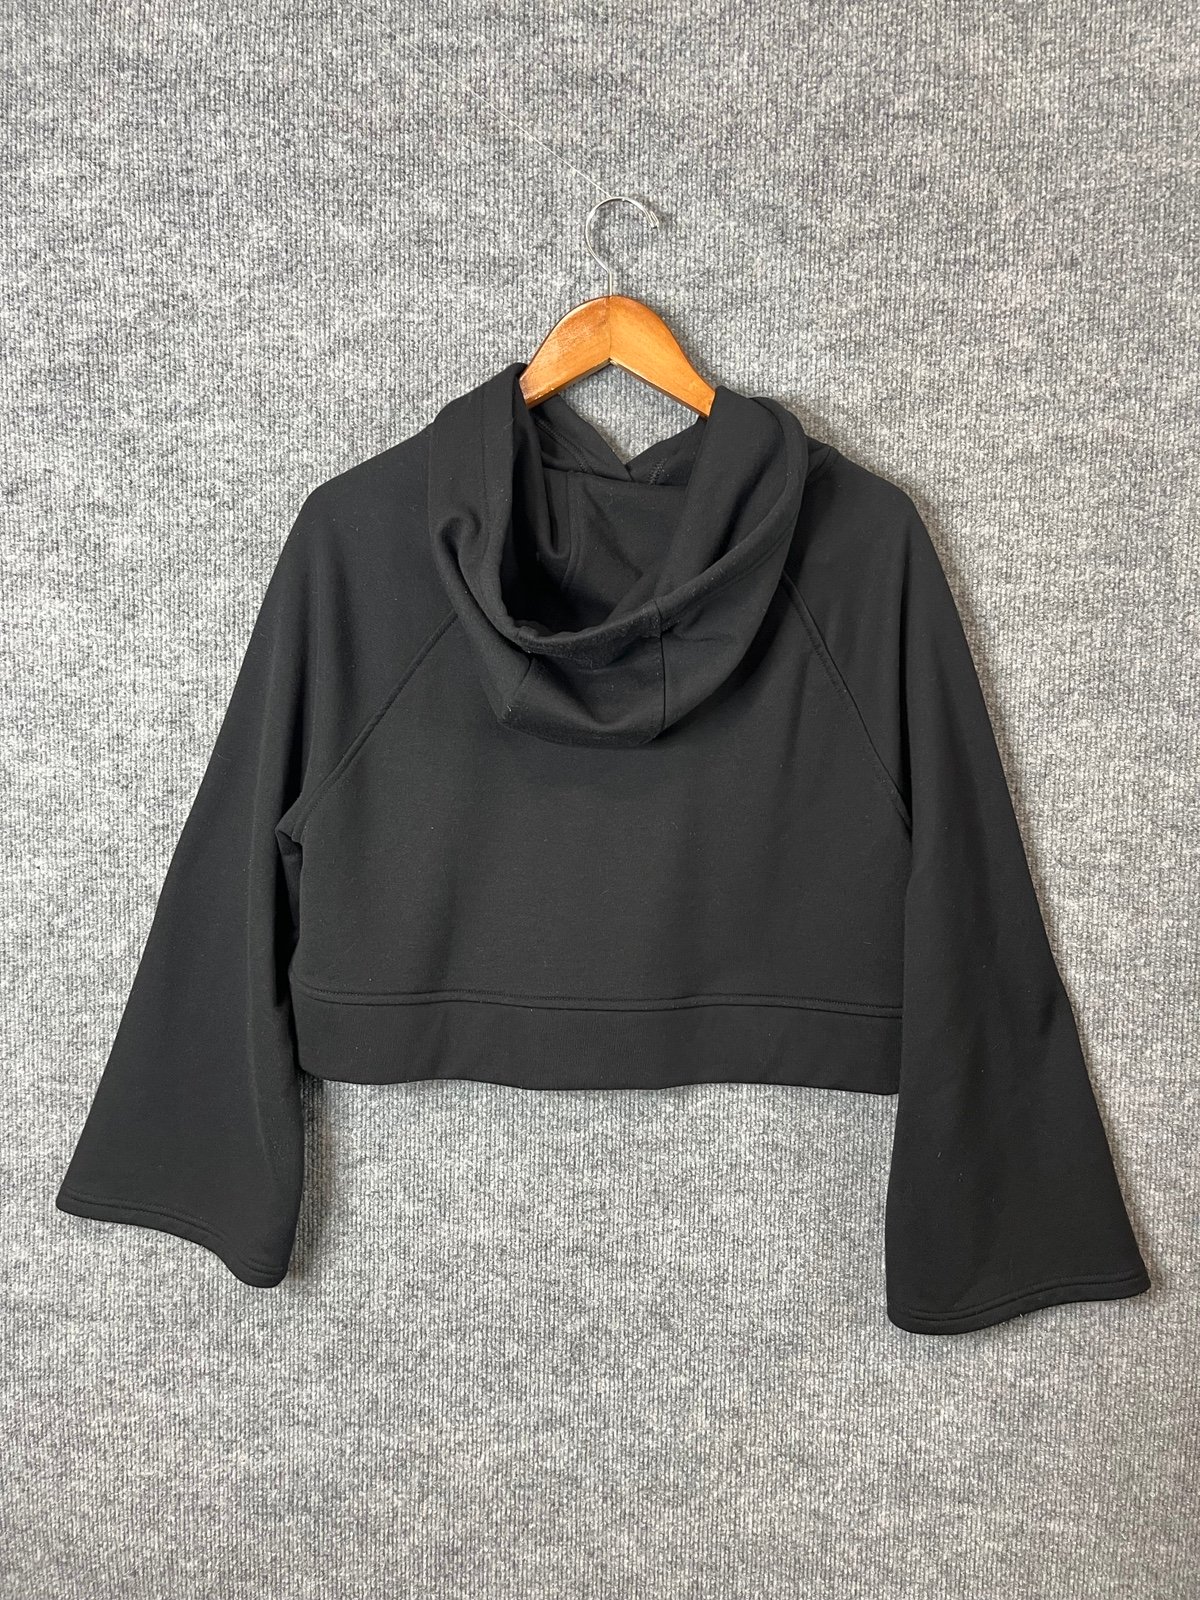 save up to 70% Athleta black cropped steady state hoodie wide sleeve size XS womens IdXc8IioG well sale